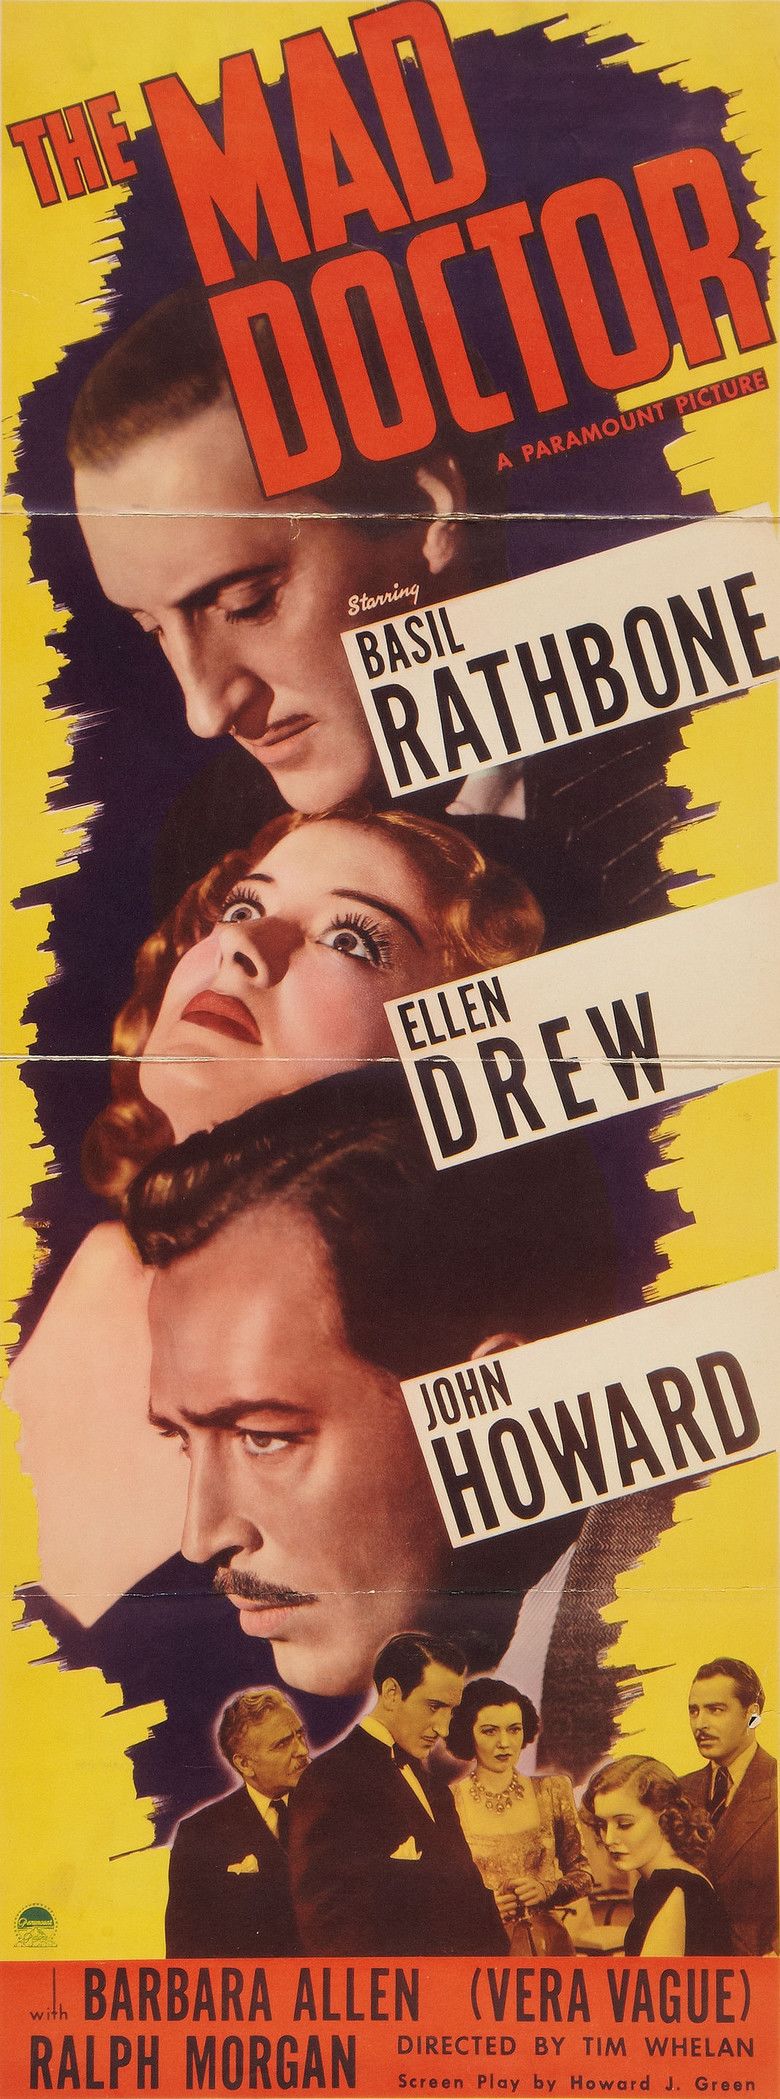 The Mad Doctor (1941 film) movie poster